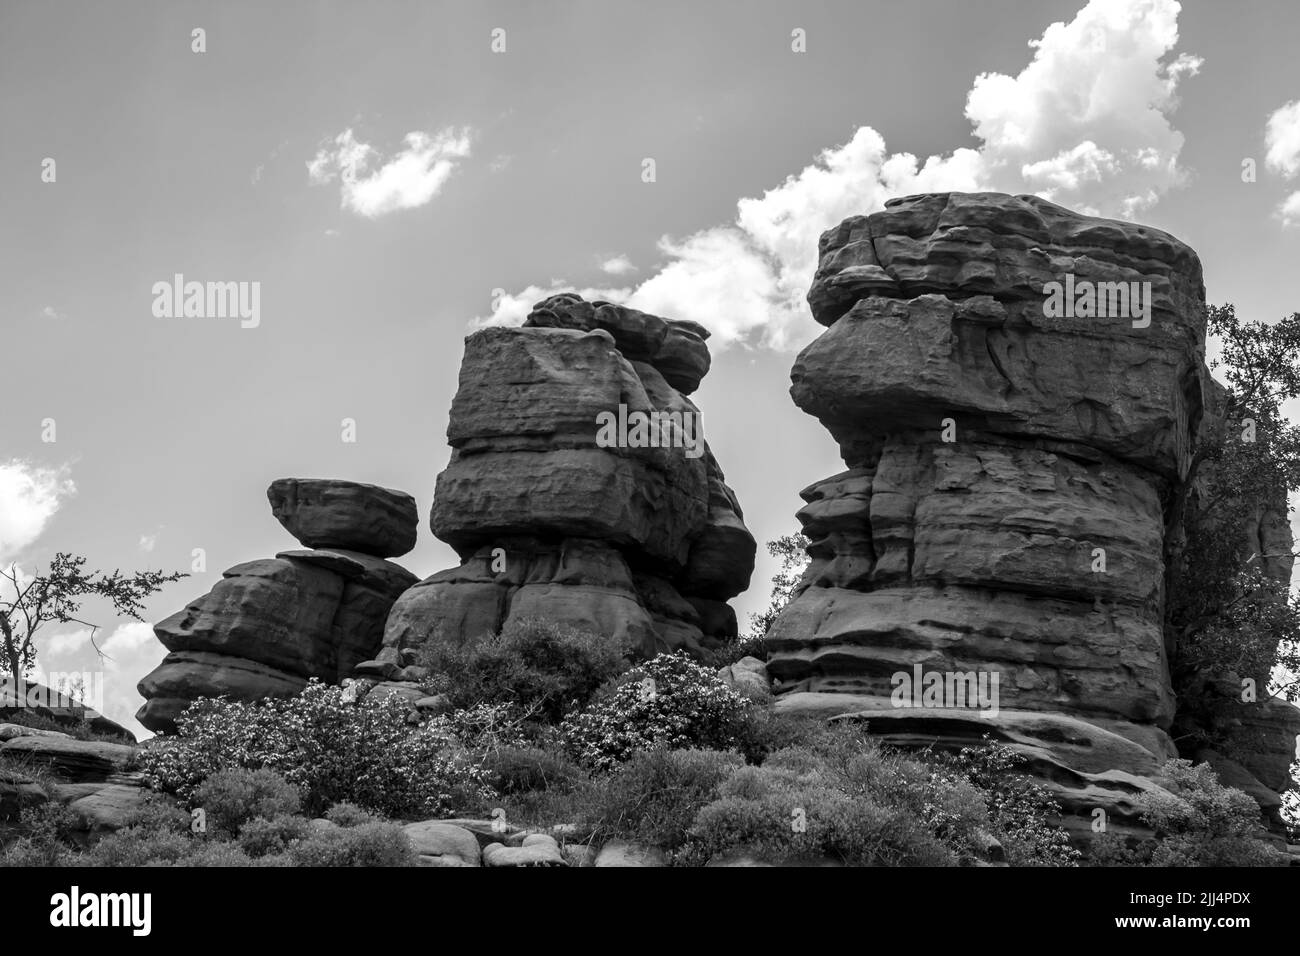 Three rock pillars in black and white in the Magaliesberg Mountain, South Africa Stock Photo